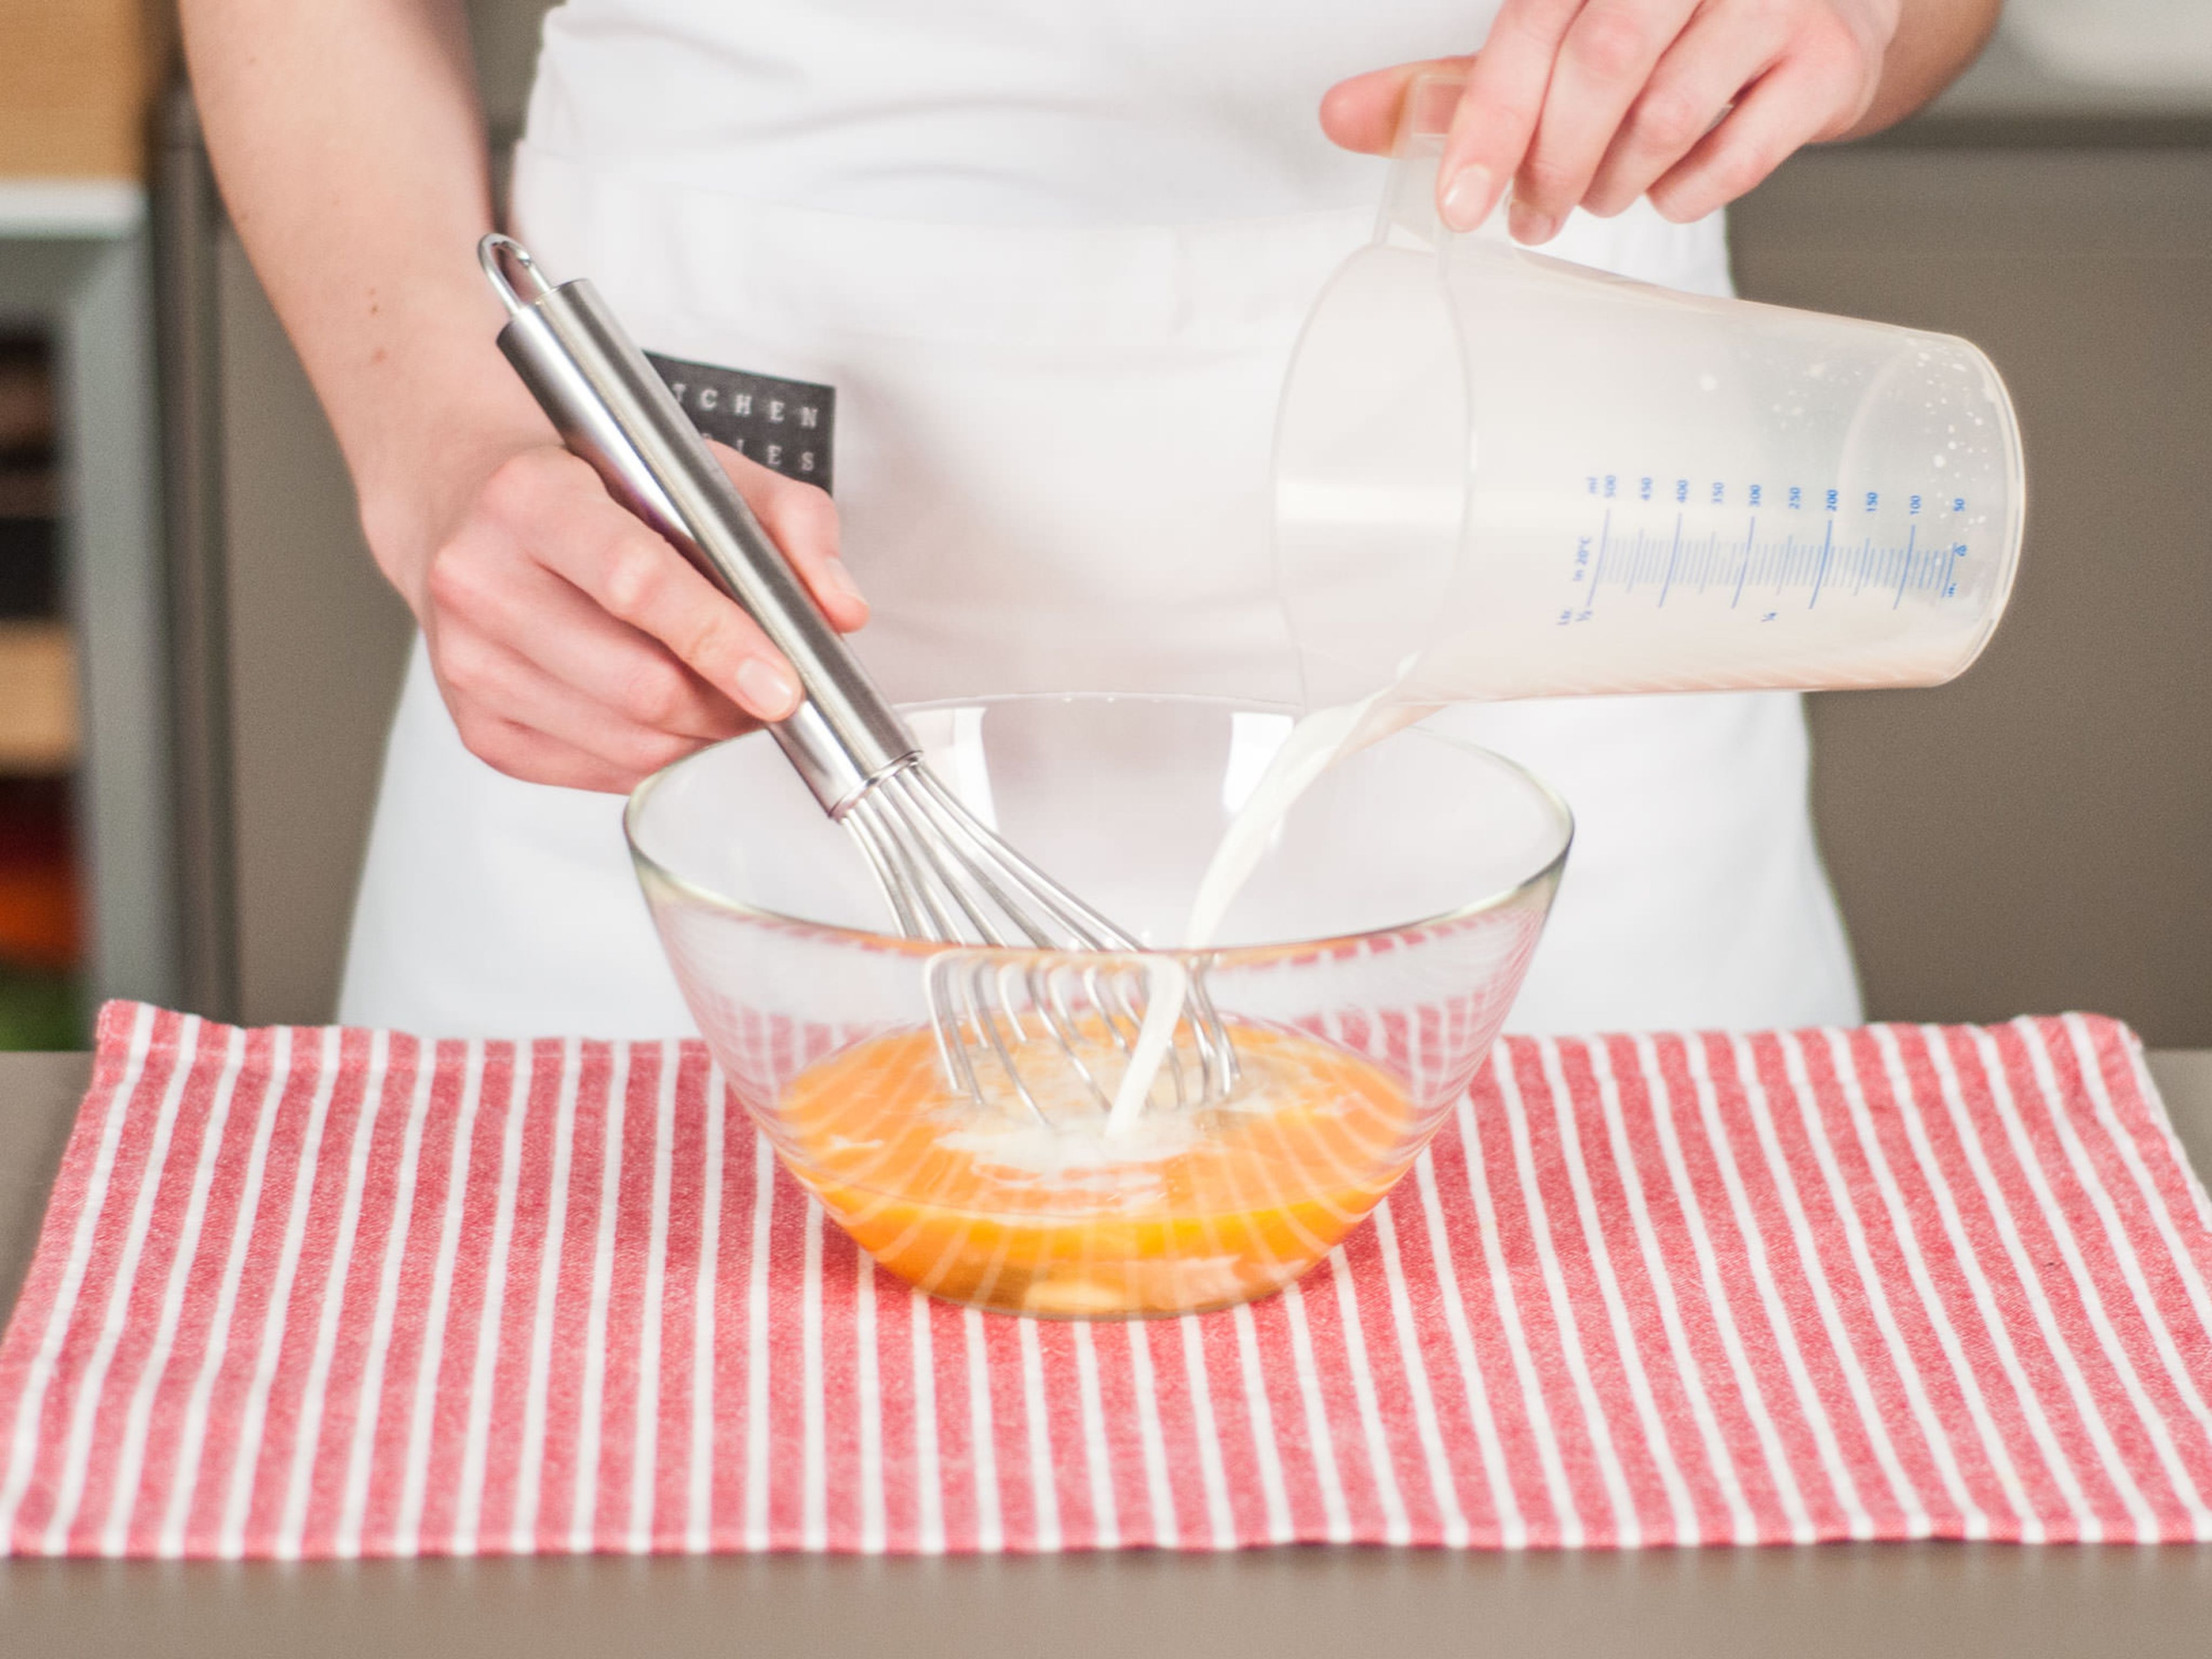 In a large bowl, whisk together eggs and milk.